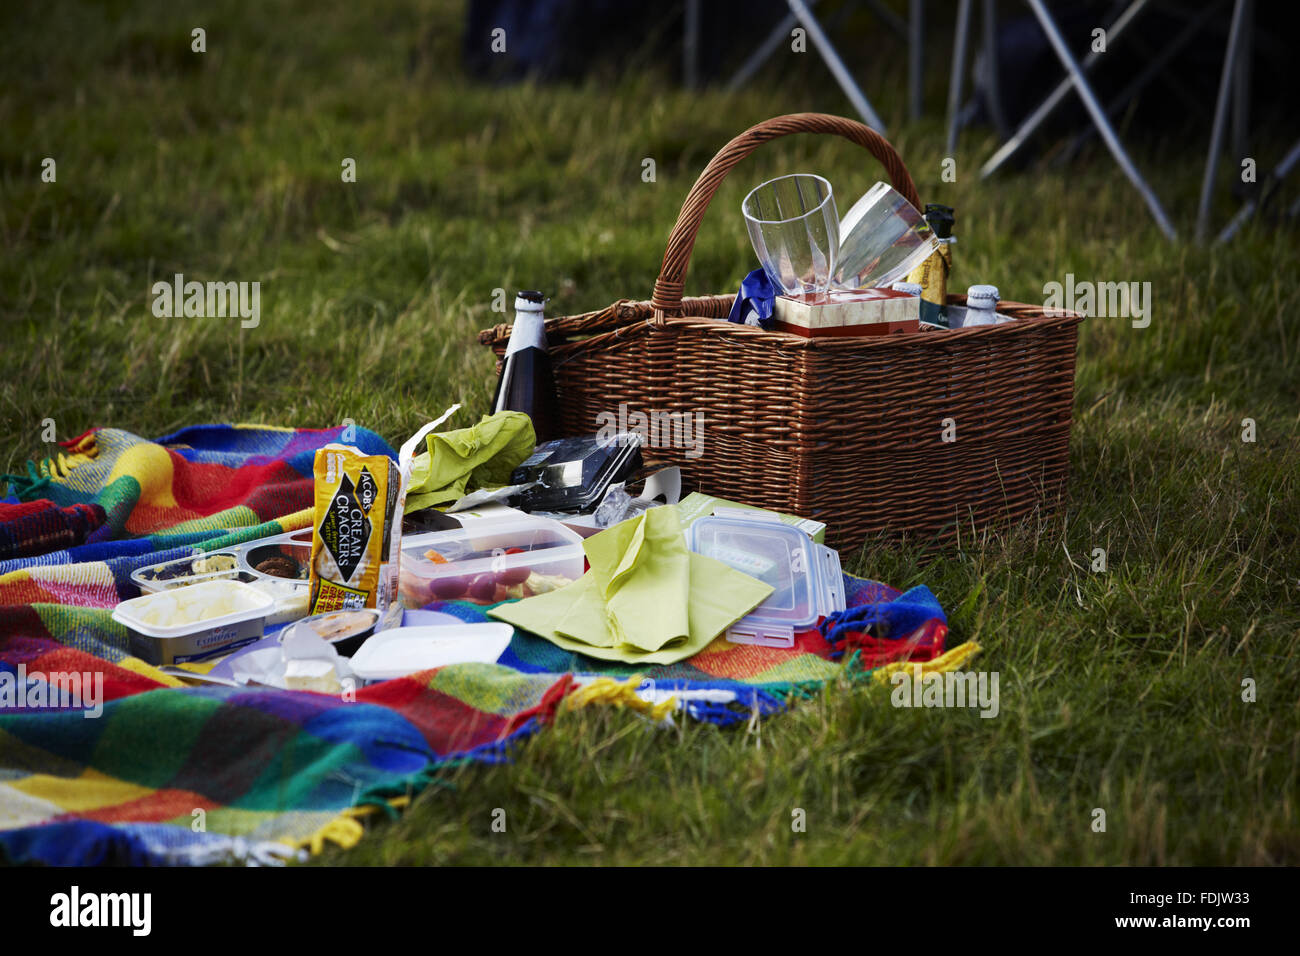 Picnic at an outdoor music concert at Blickling Hall, Norfolk, in July. The event, called the 'Greatest 80s Party', featured bands and singers from the 1980s. Stock Photo